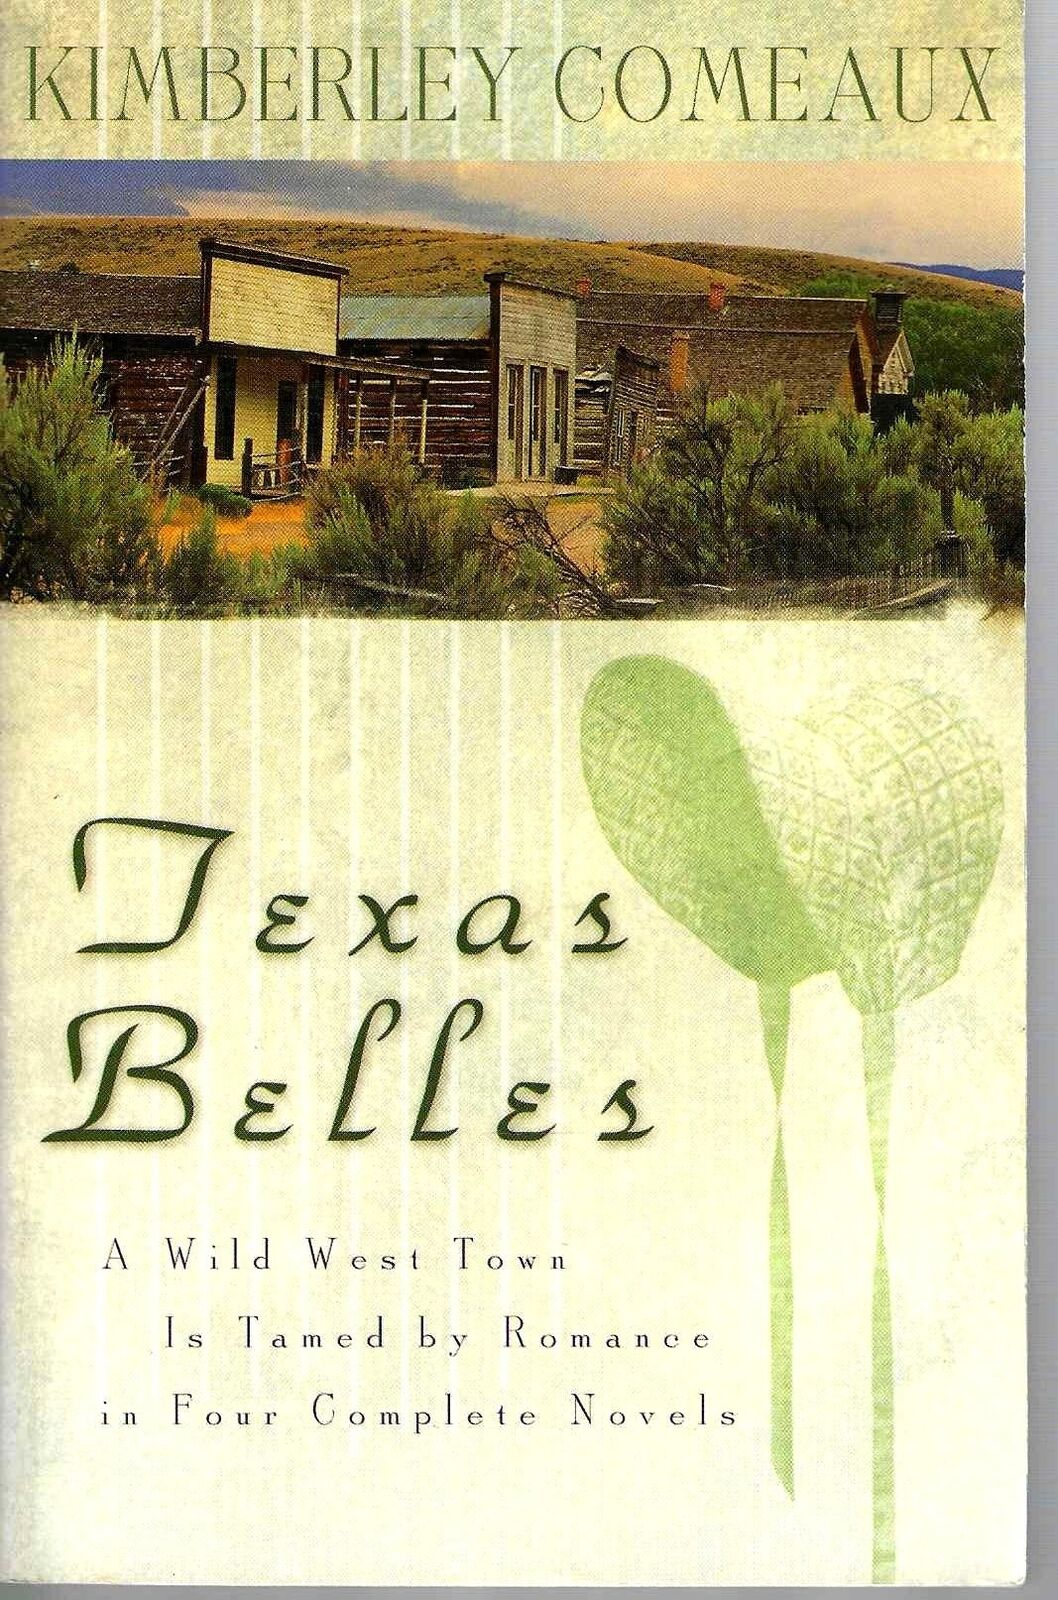 Kimberly Comeaux / Texas Belles Wild West Town is Tamed by romance in Four 1st